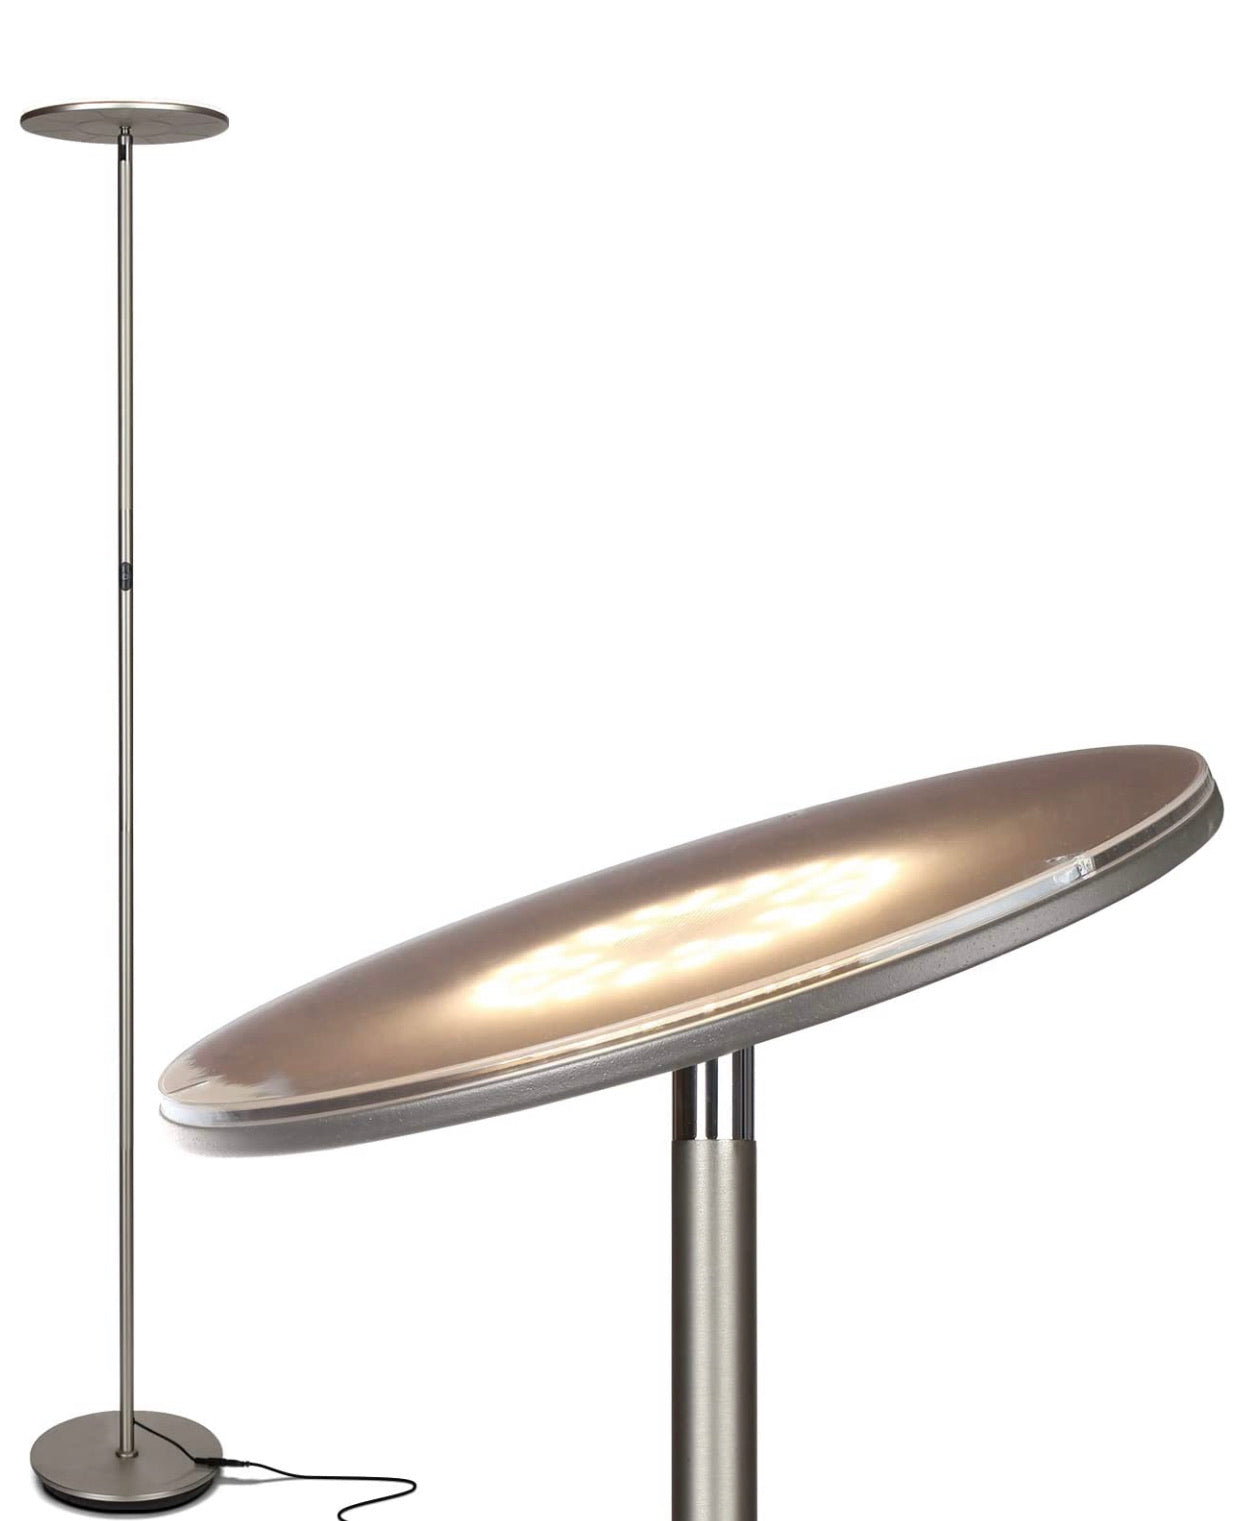 Sky Moon LED Torchiere Super Bright Floor Lamp - High Lumen Light for Living Rooms & Offices - Dimmable